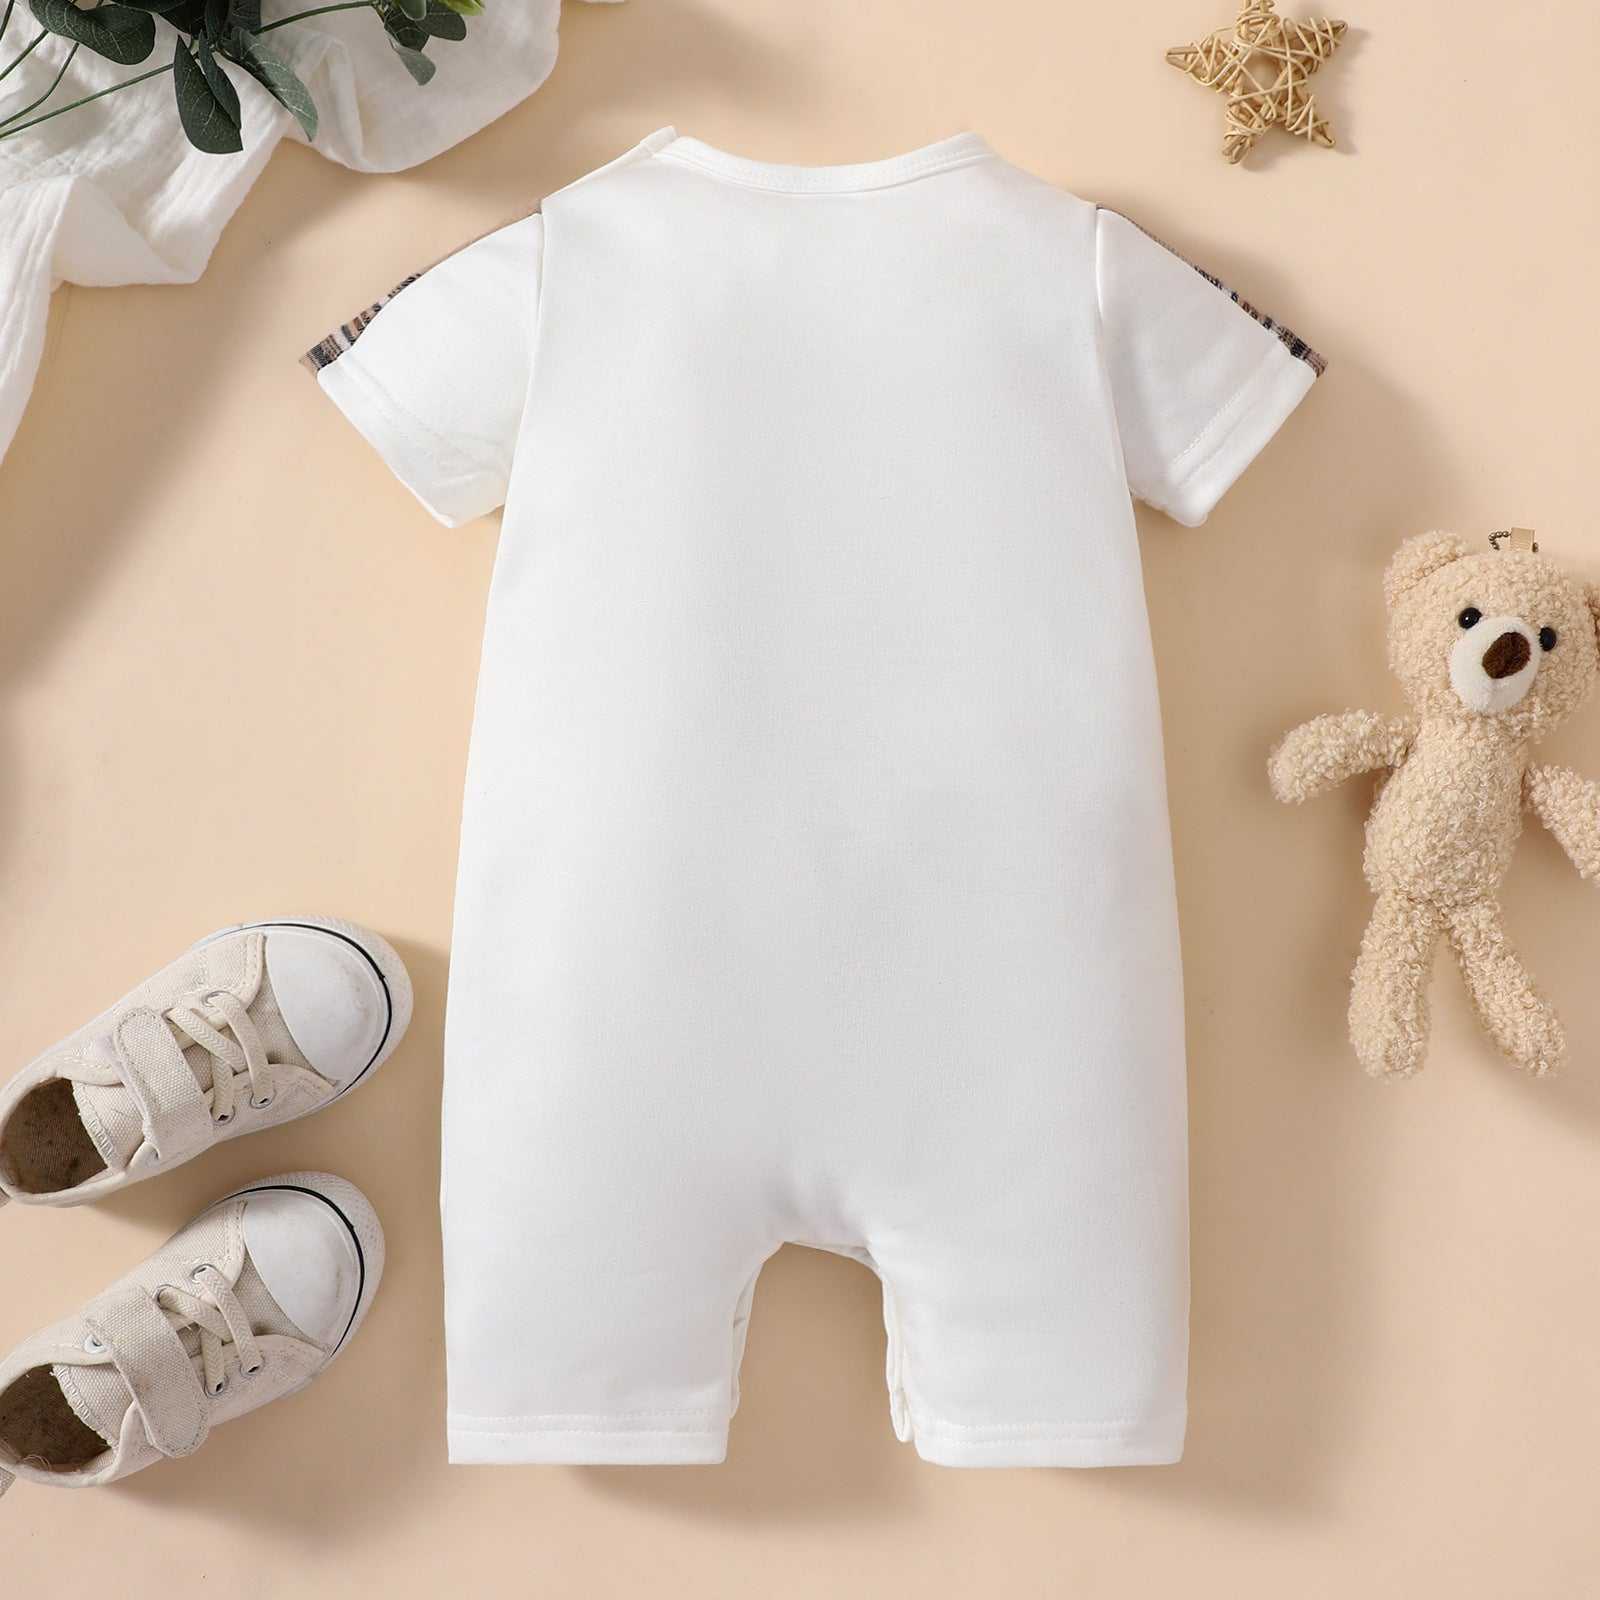 Letter Embroidery Cute Baby Onesie Letter Embroidery Cute Baby Onesie J&E Discount Store 